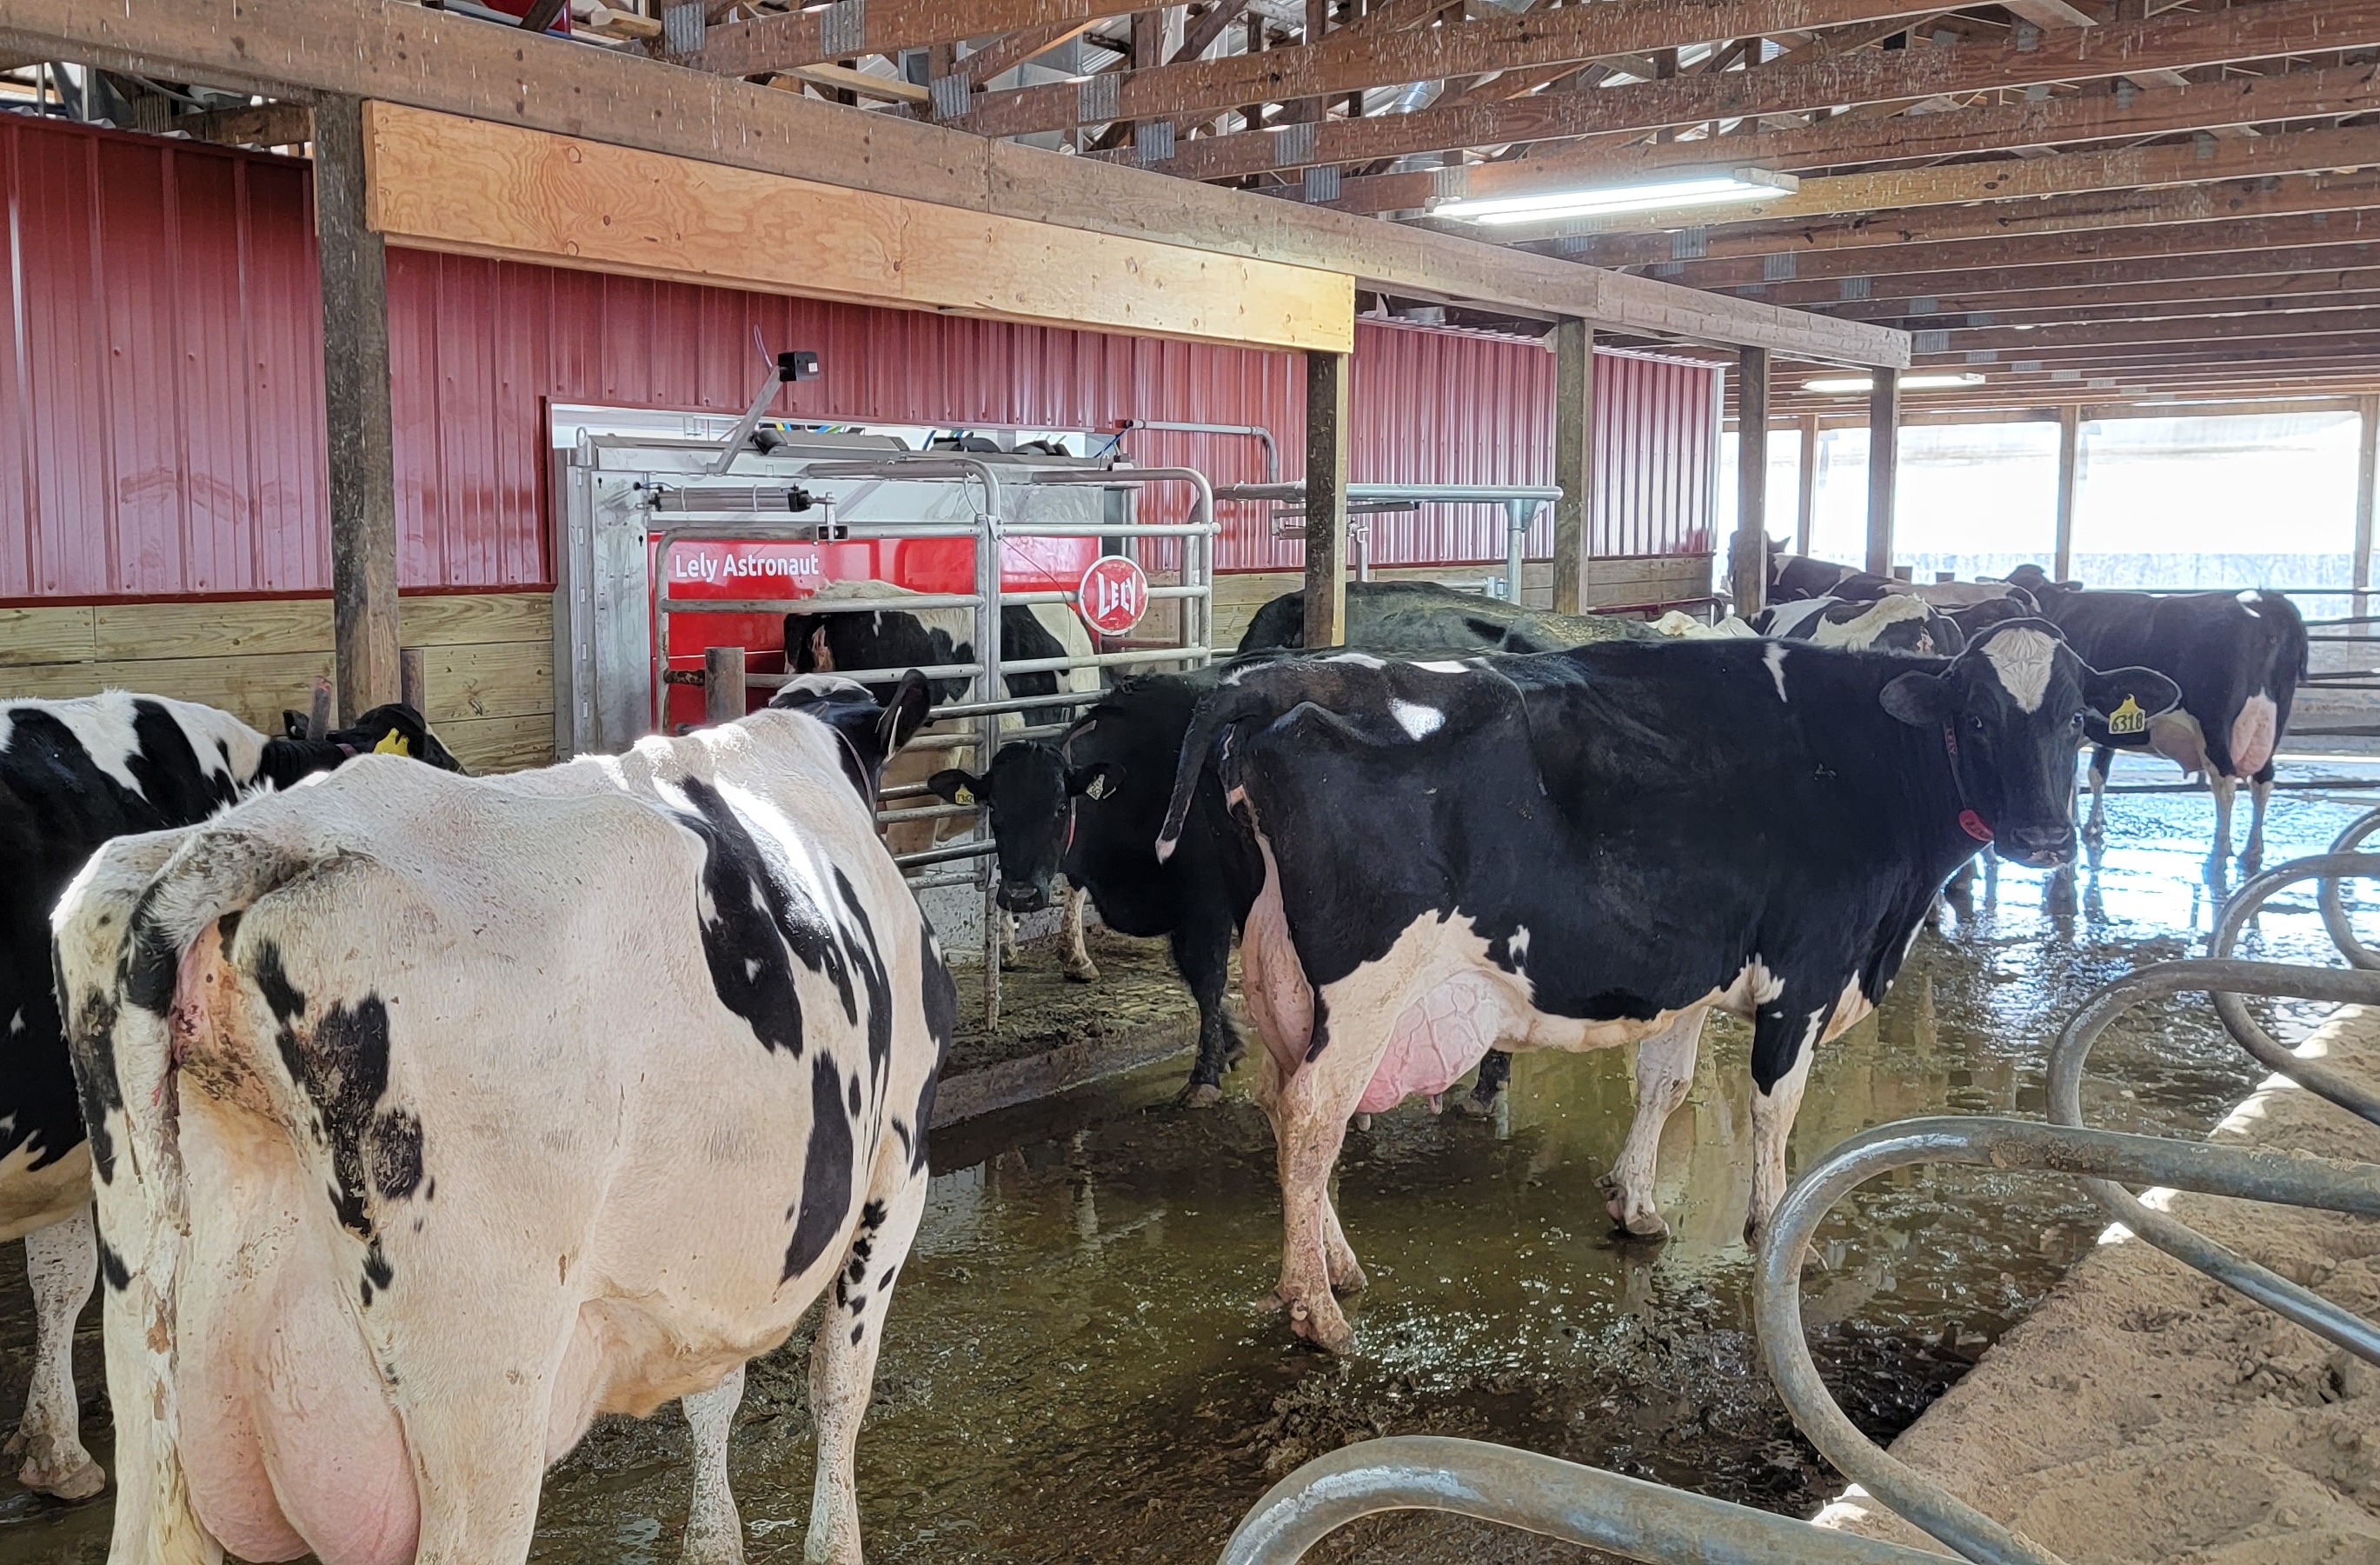 Sparks Quaker Acres' Lely Astronaut A5 robotic milking systems